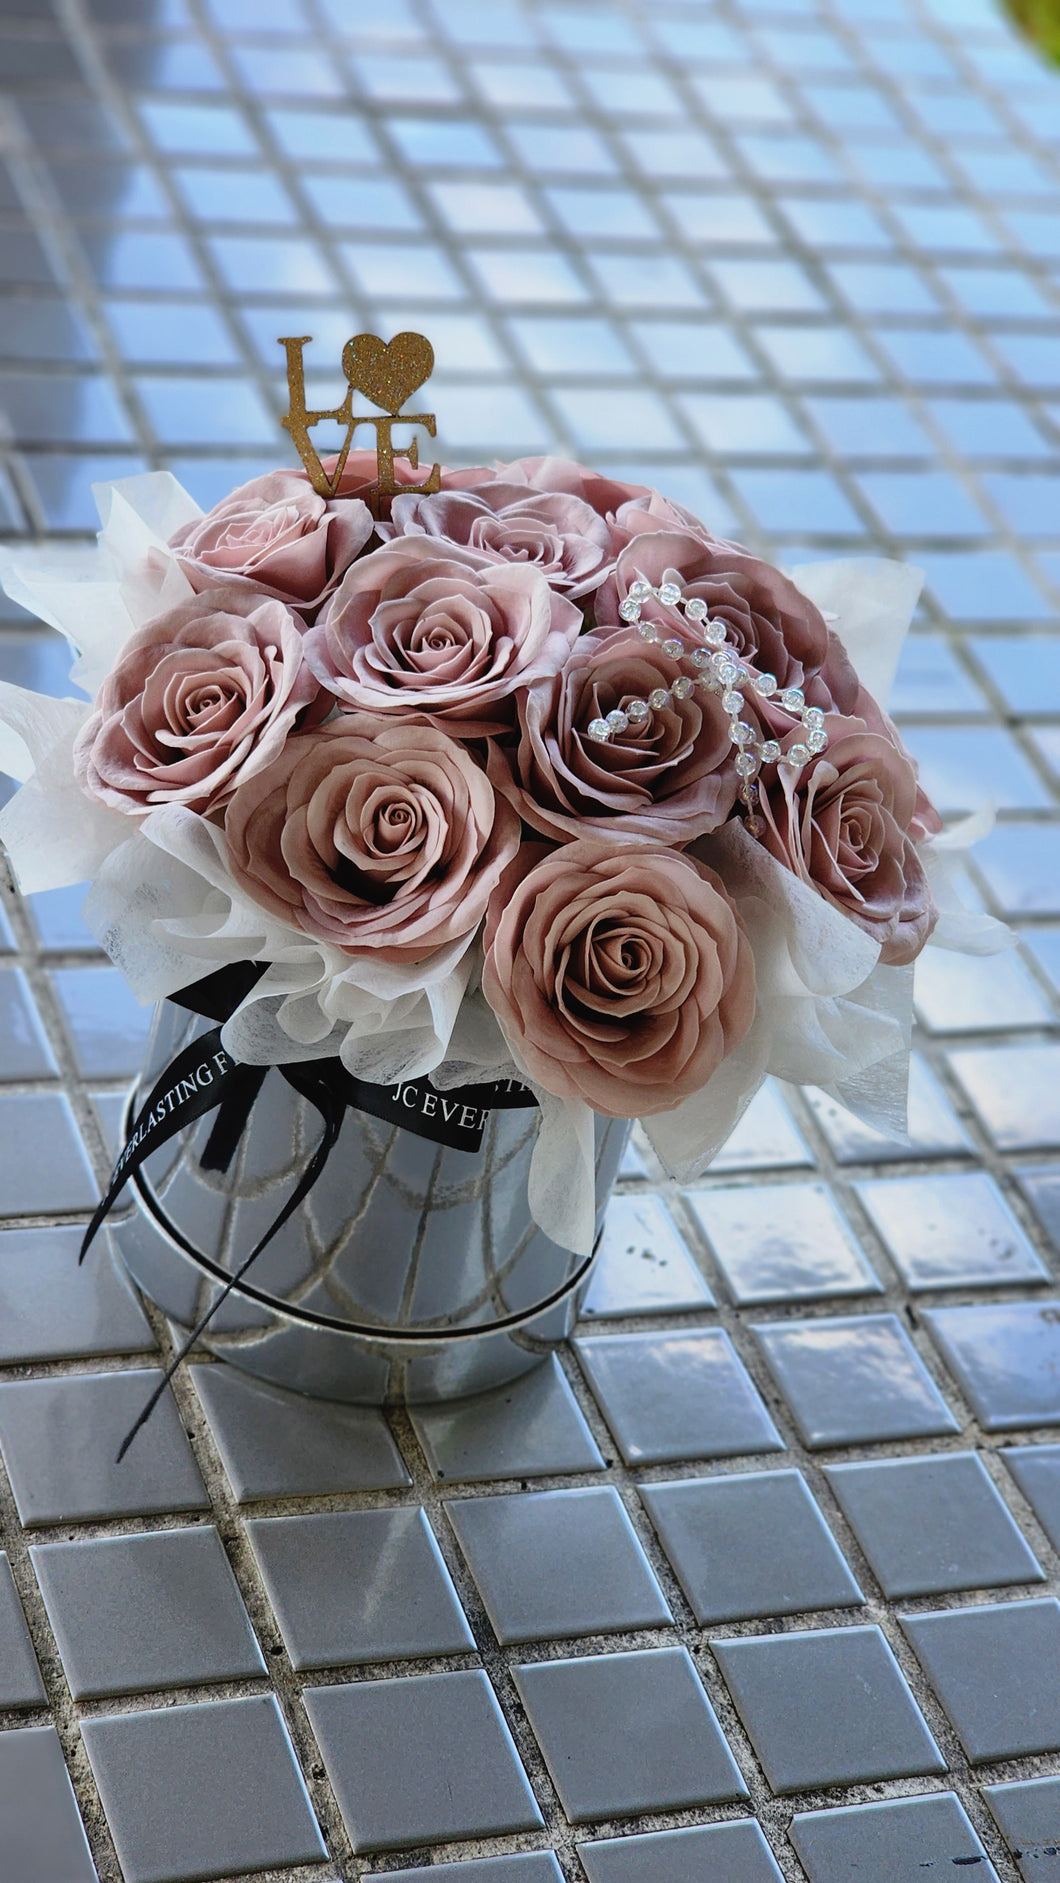 Silver Bucket of Roses (Pink Soap Roses)